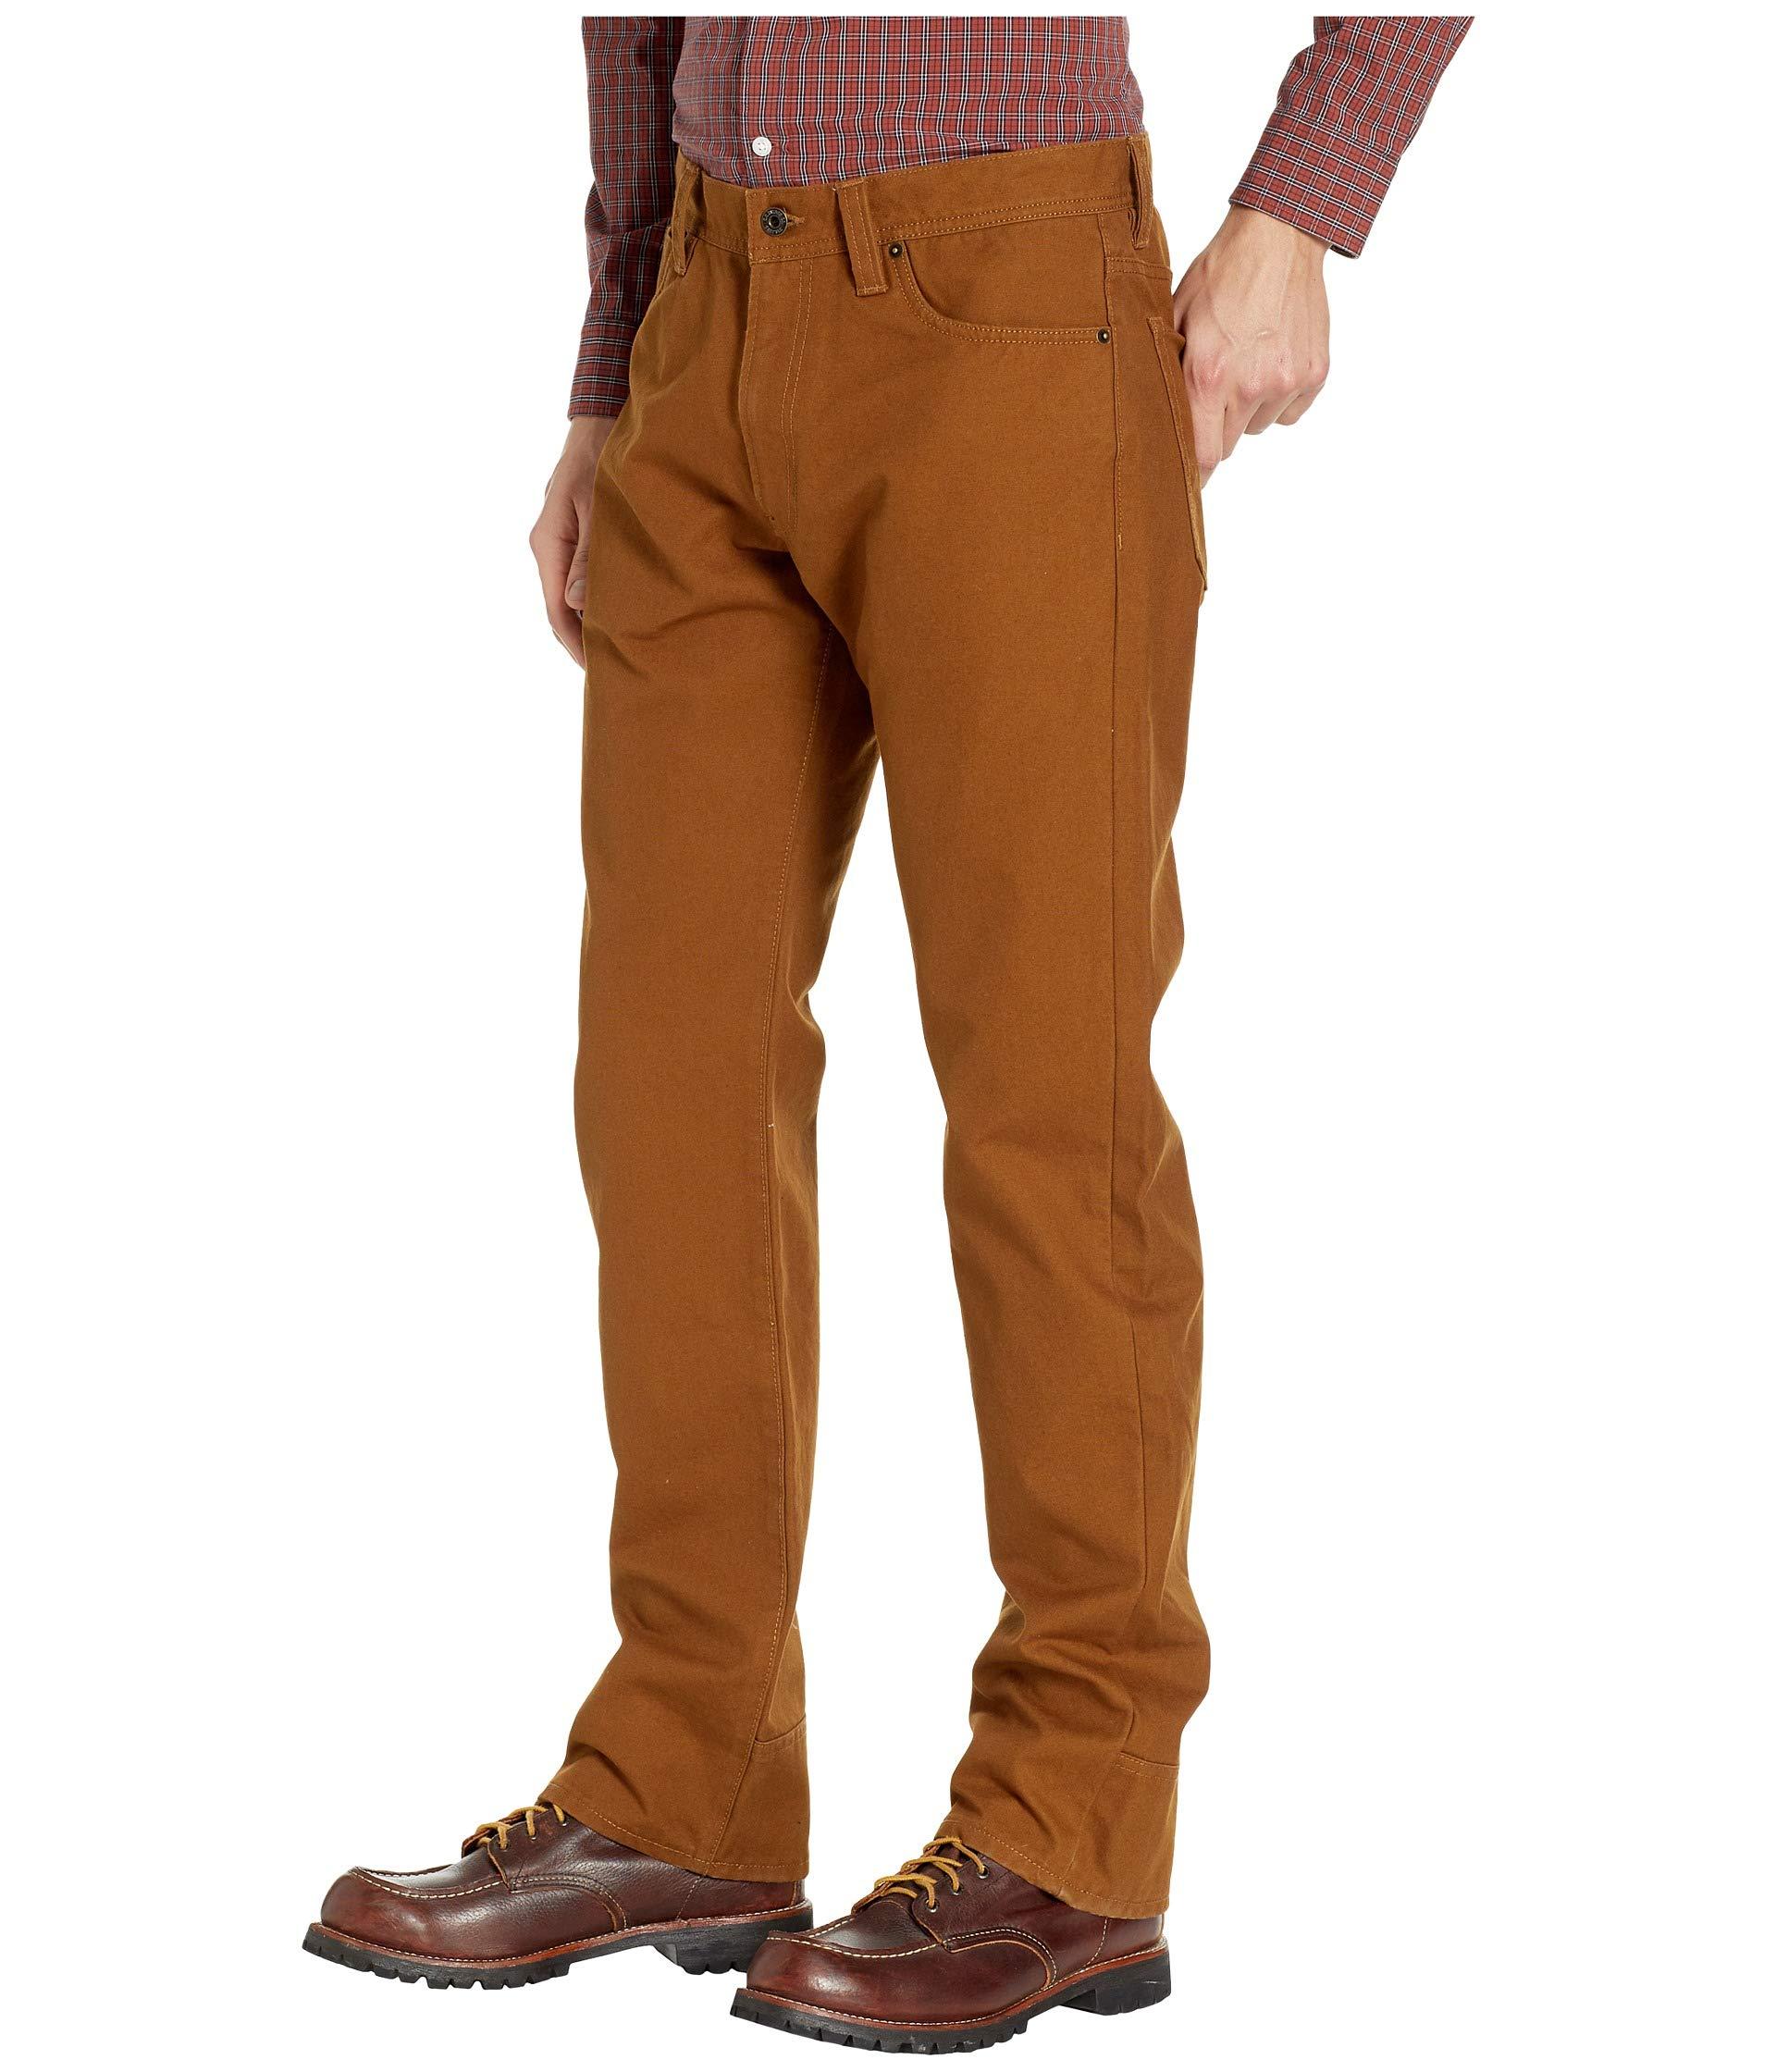 Filson Cotton Dry Tin Five-pocket Pants in Brown for Men - Lyst